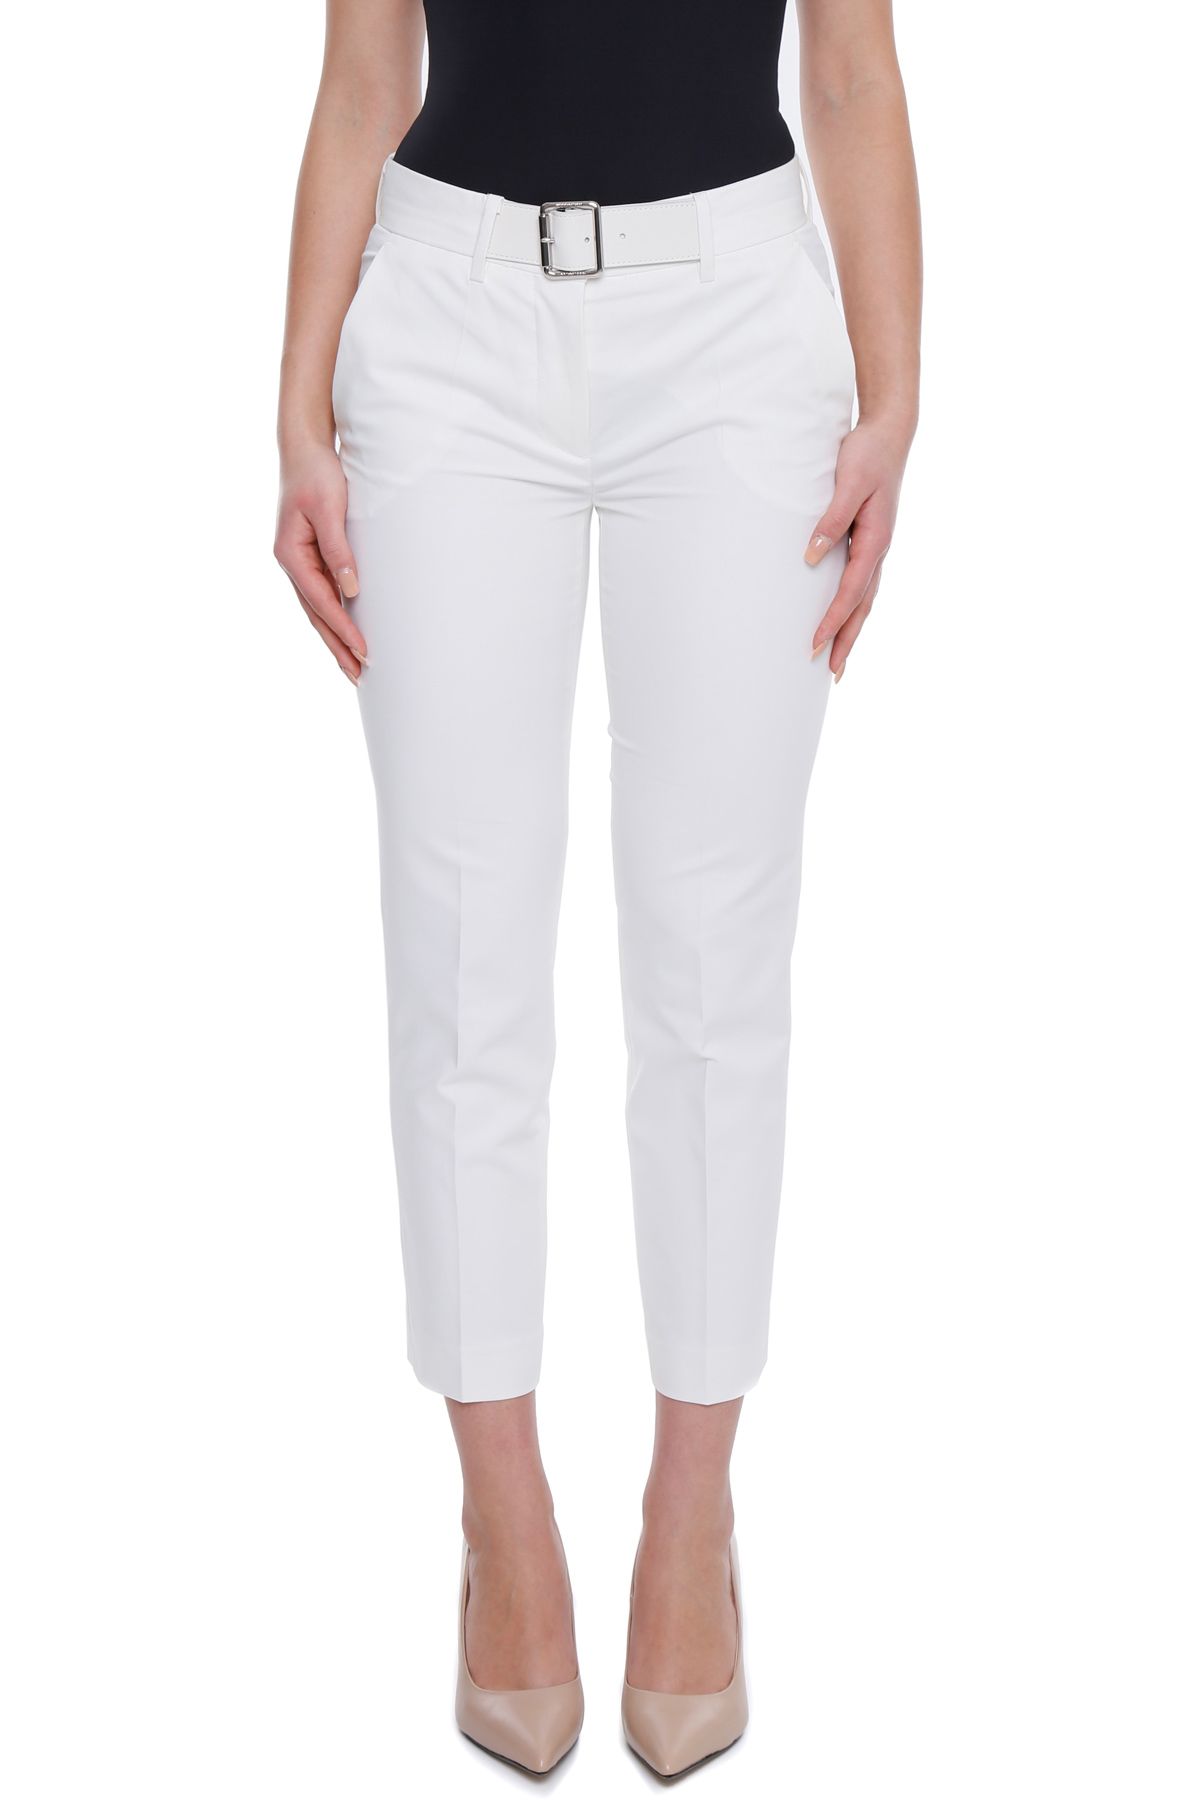 MONCLER Belted Trousers in Biancobianco | ModeSens